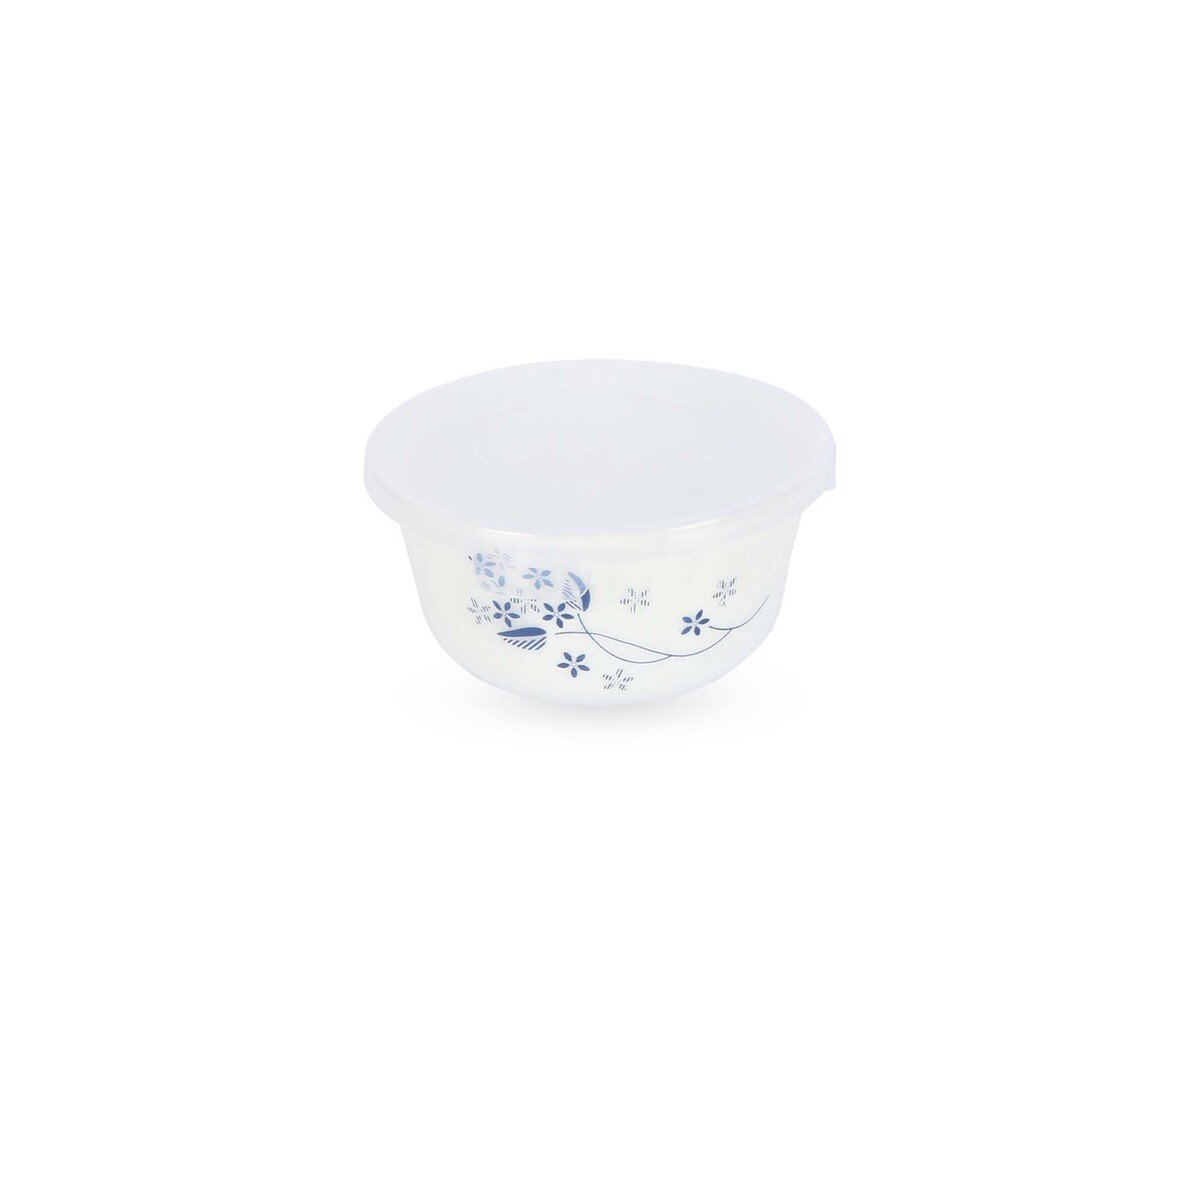 Cello Imperial Stor Bowl 6pcs Set 8.4cm with Lid Dainty Blue